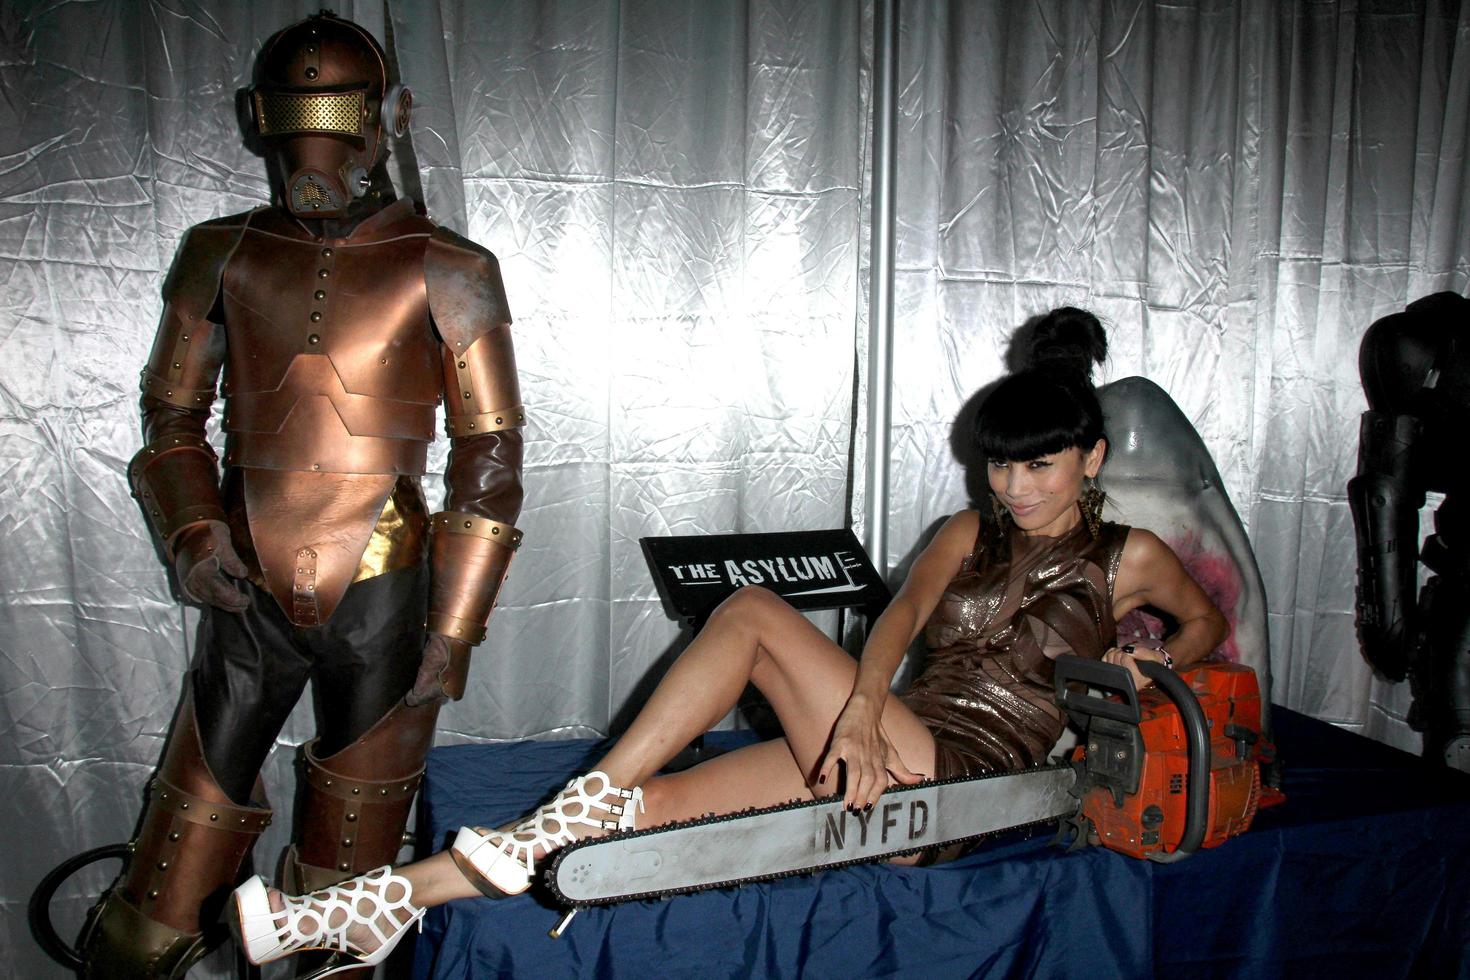 LOS ANGELES, SEP 6 - Bai Ling at the Night of Science Fiction, Fantasy and Horror After Party at IATSE Stage 80 on September 6, 2014 in Burbank, CA photo